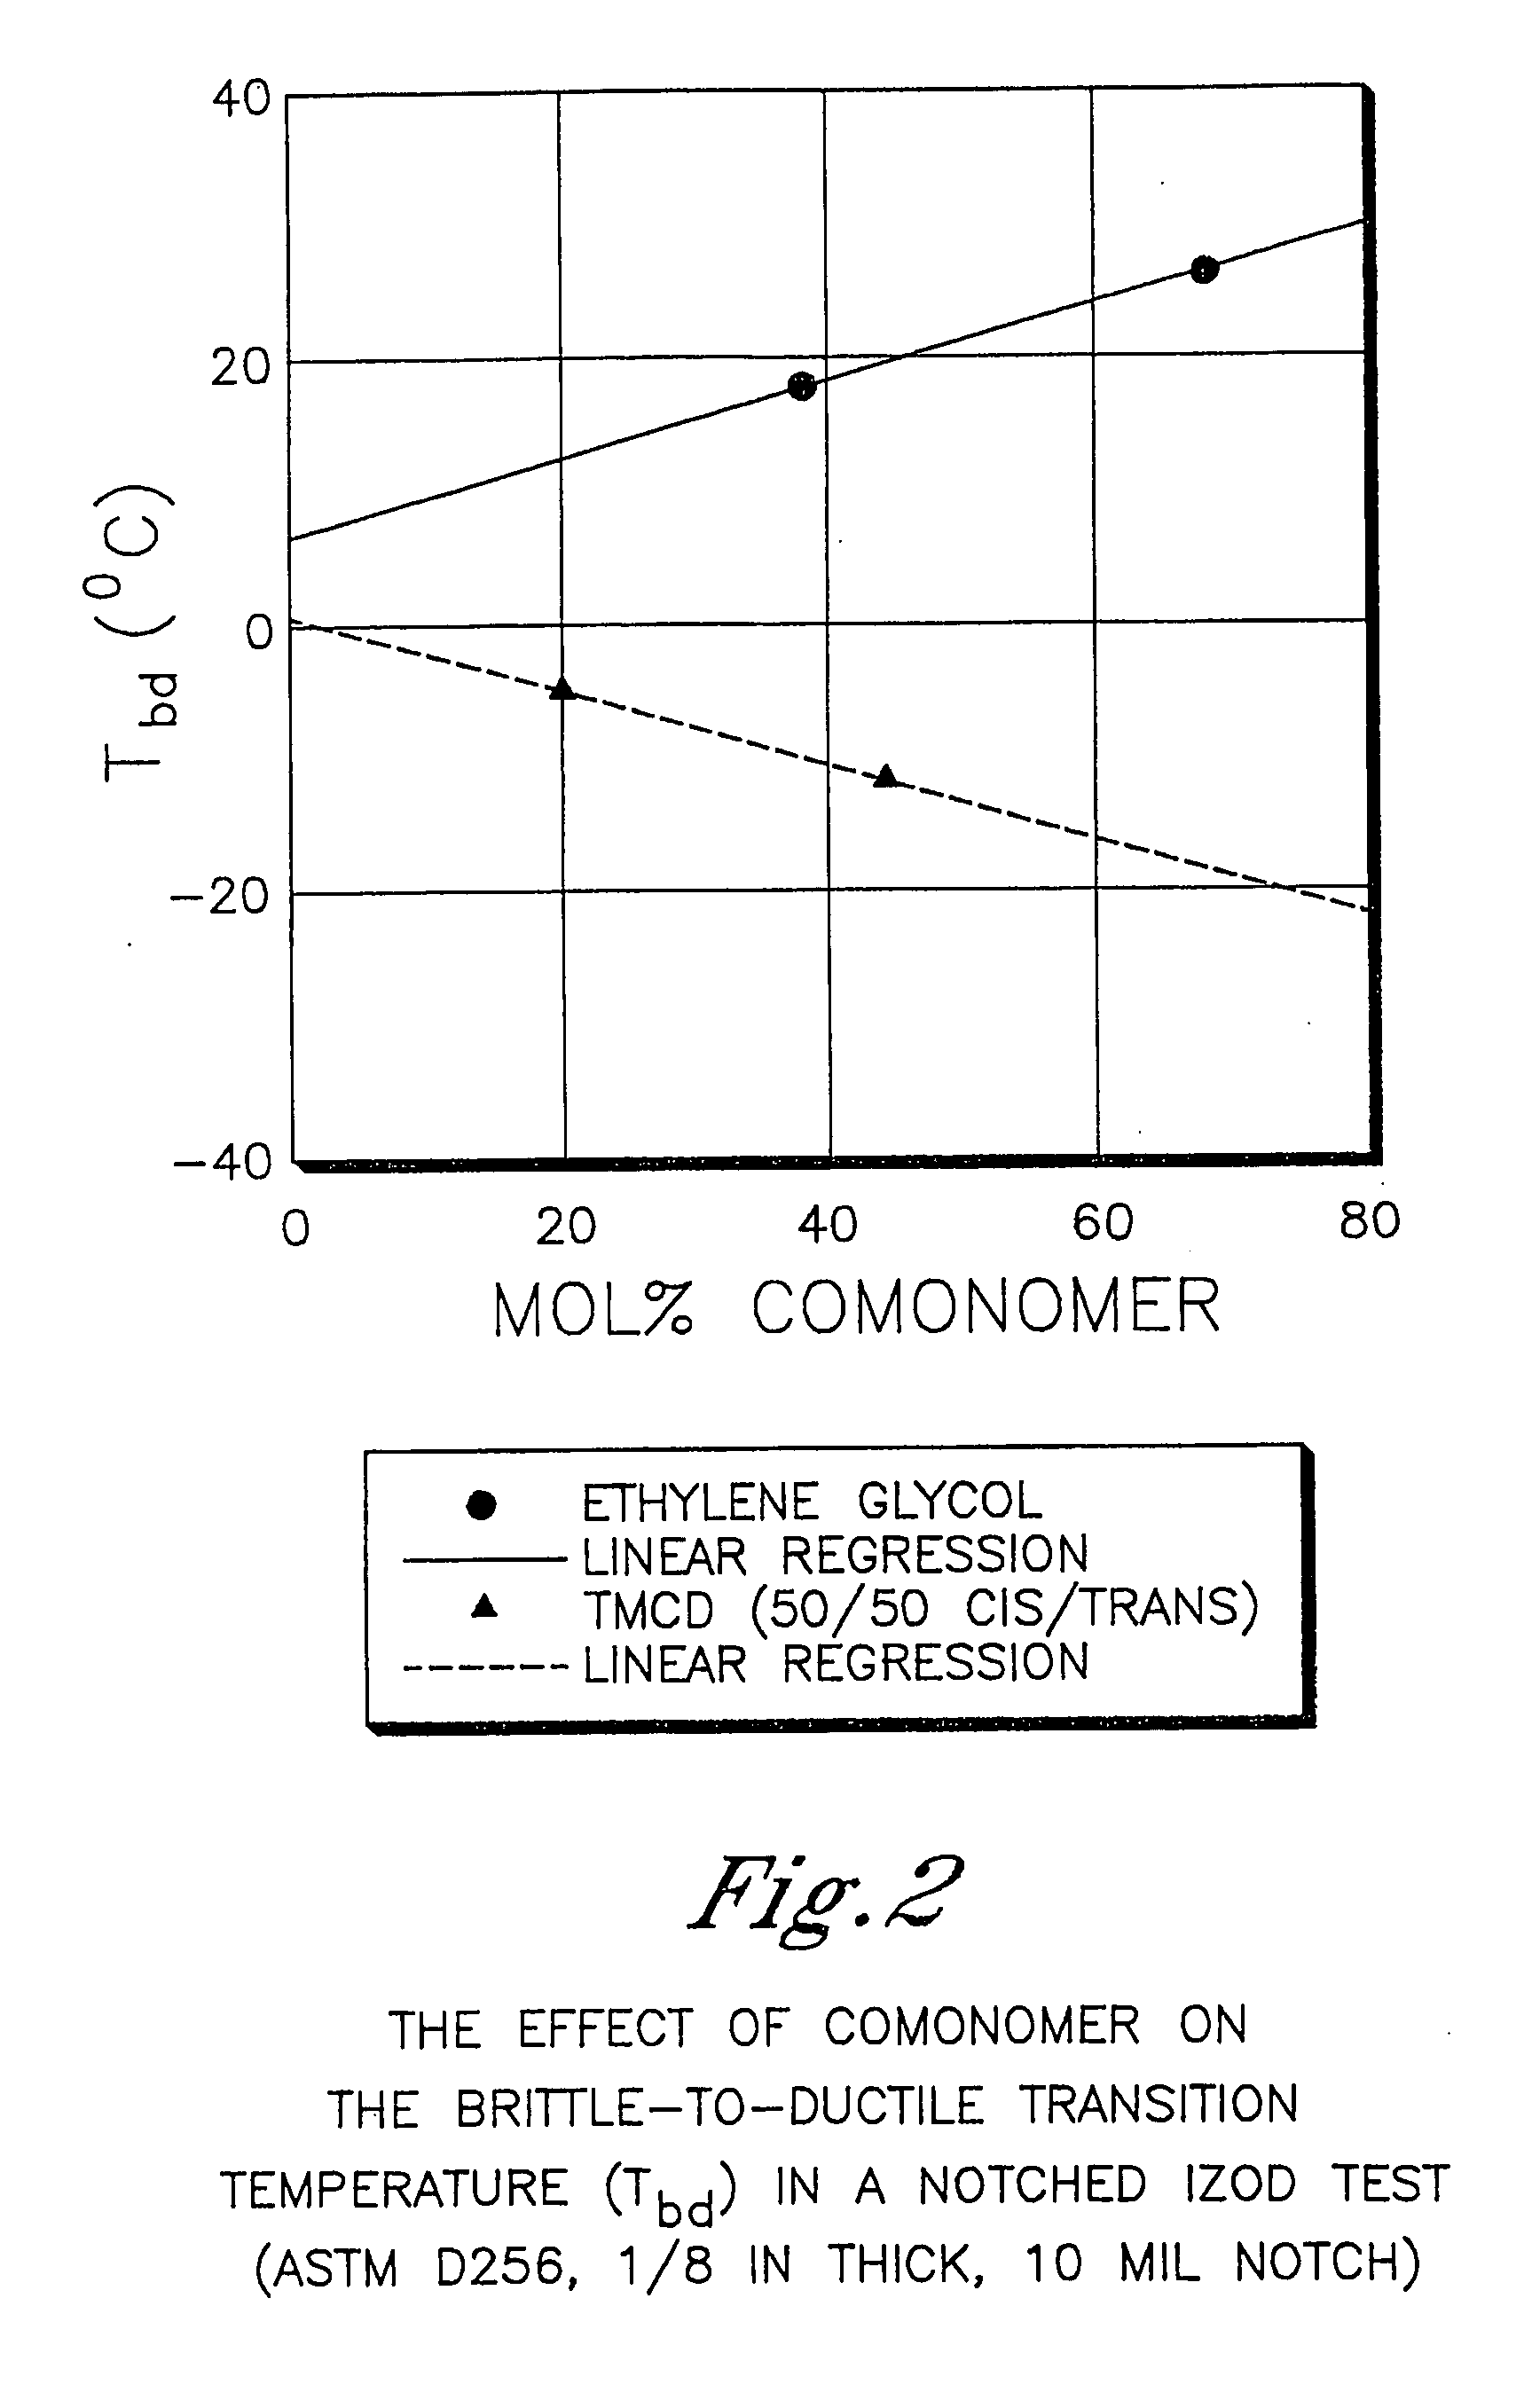 Blood therapy containers comprising polyester compositions formed from 2,2,4,4-tetramethyl-1,3-cyclobutanediol and 1,4-cyclohexanedimethanol